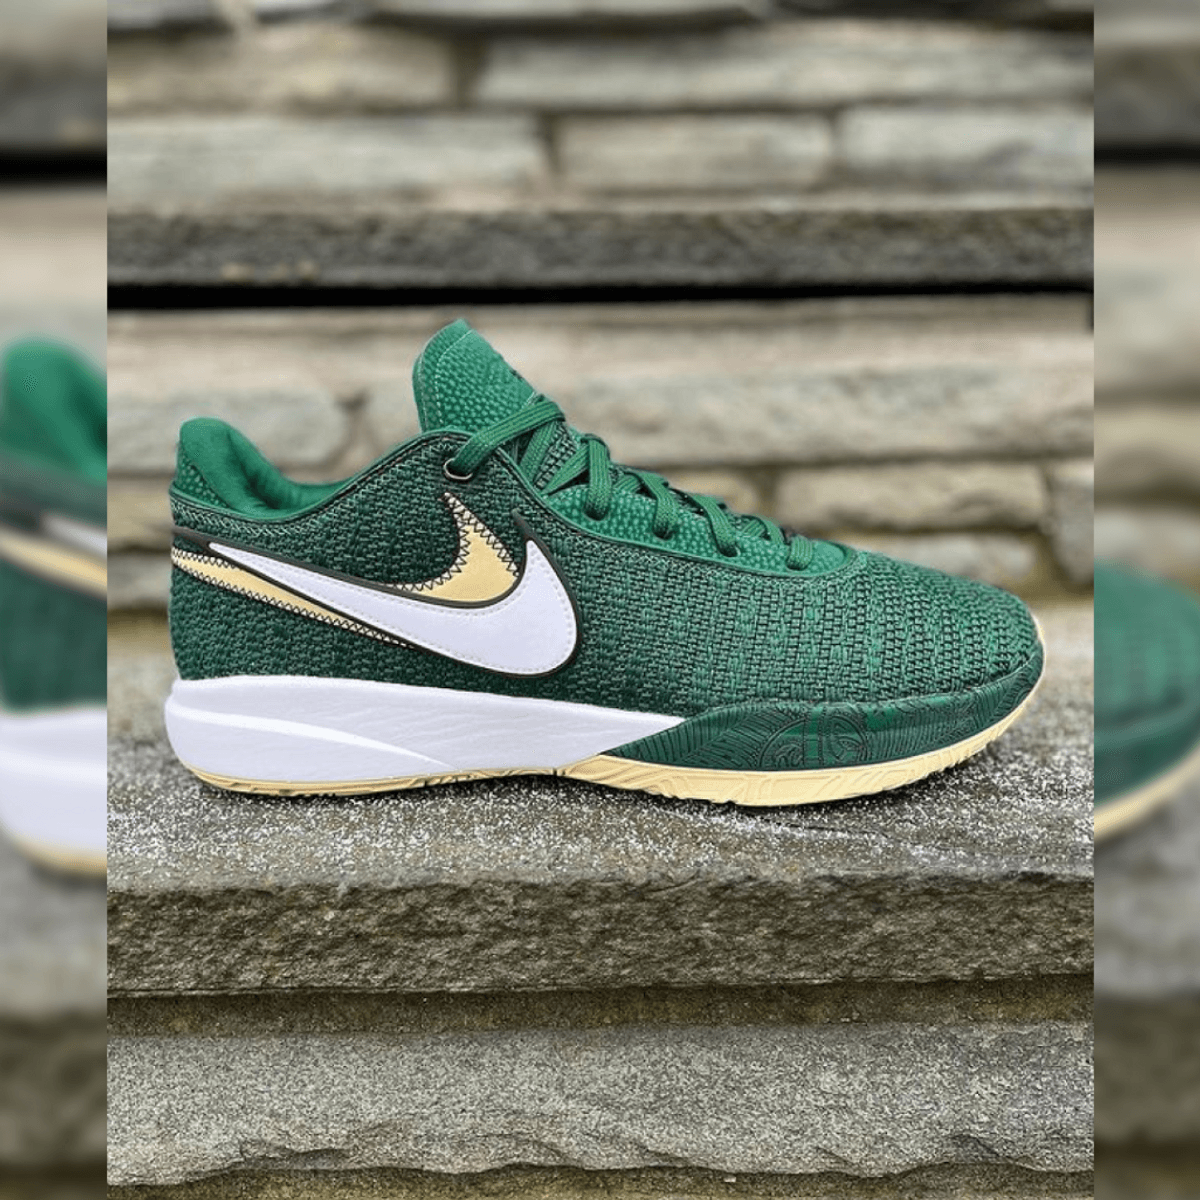 The St. Vincent-St. Mary High School Basketball Team Is Receiving An Exclusive Nike LeBron 20 PE